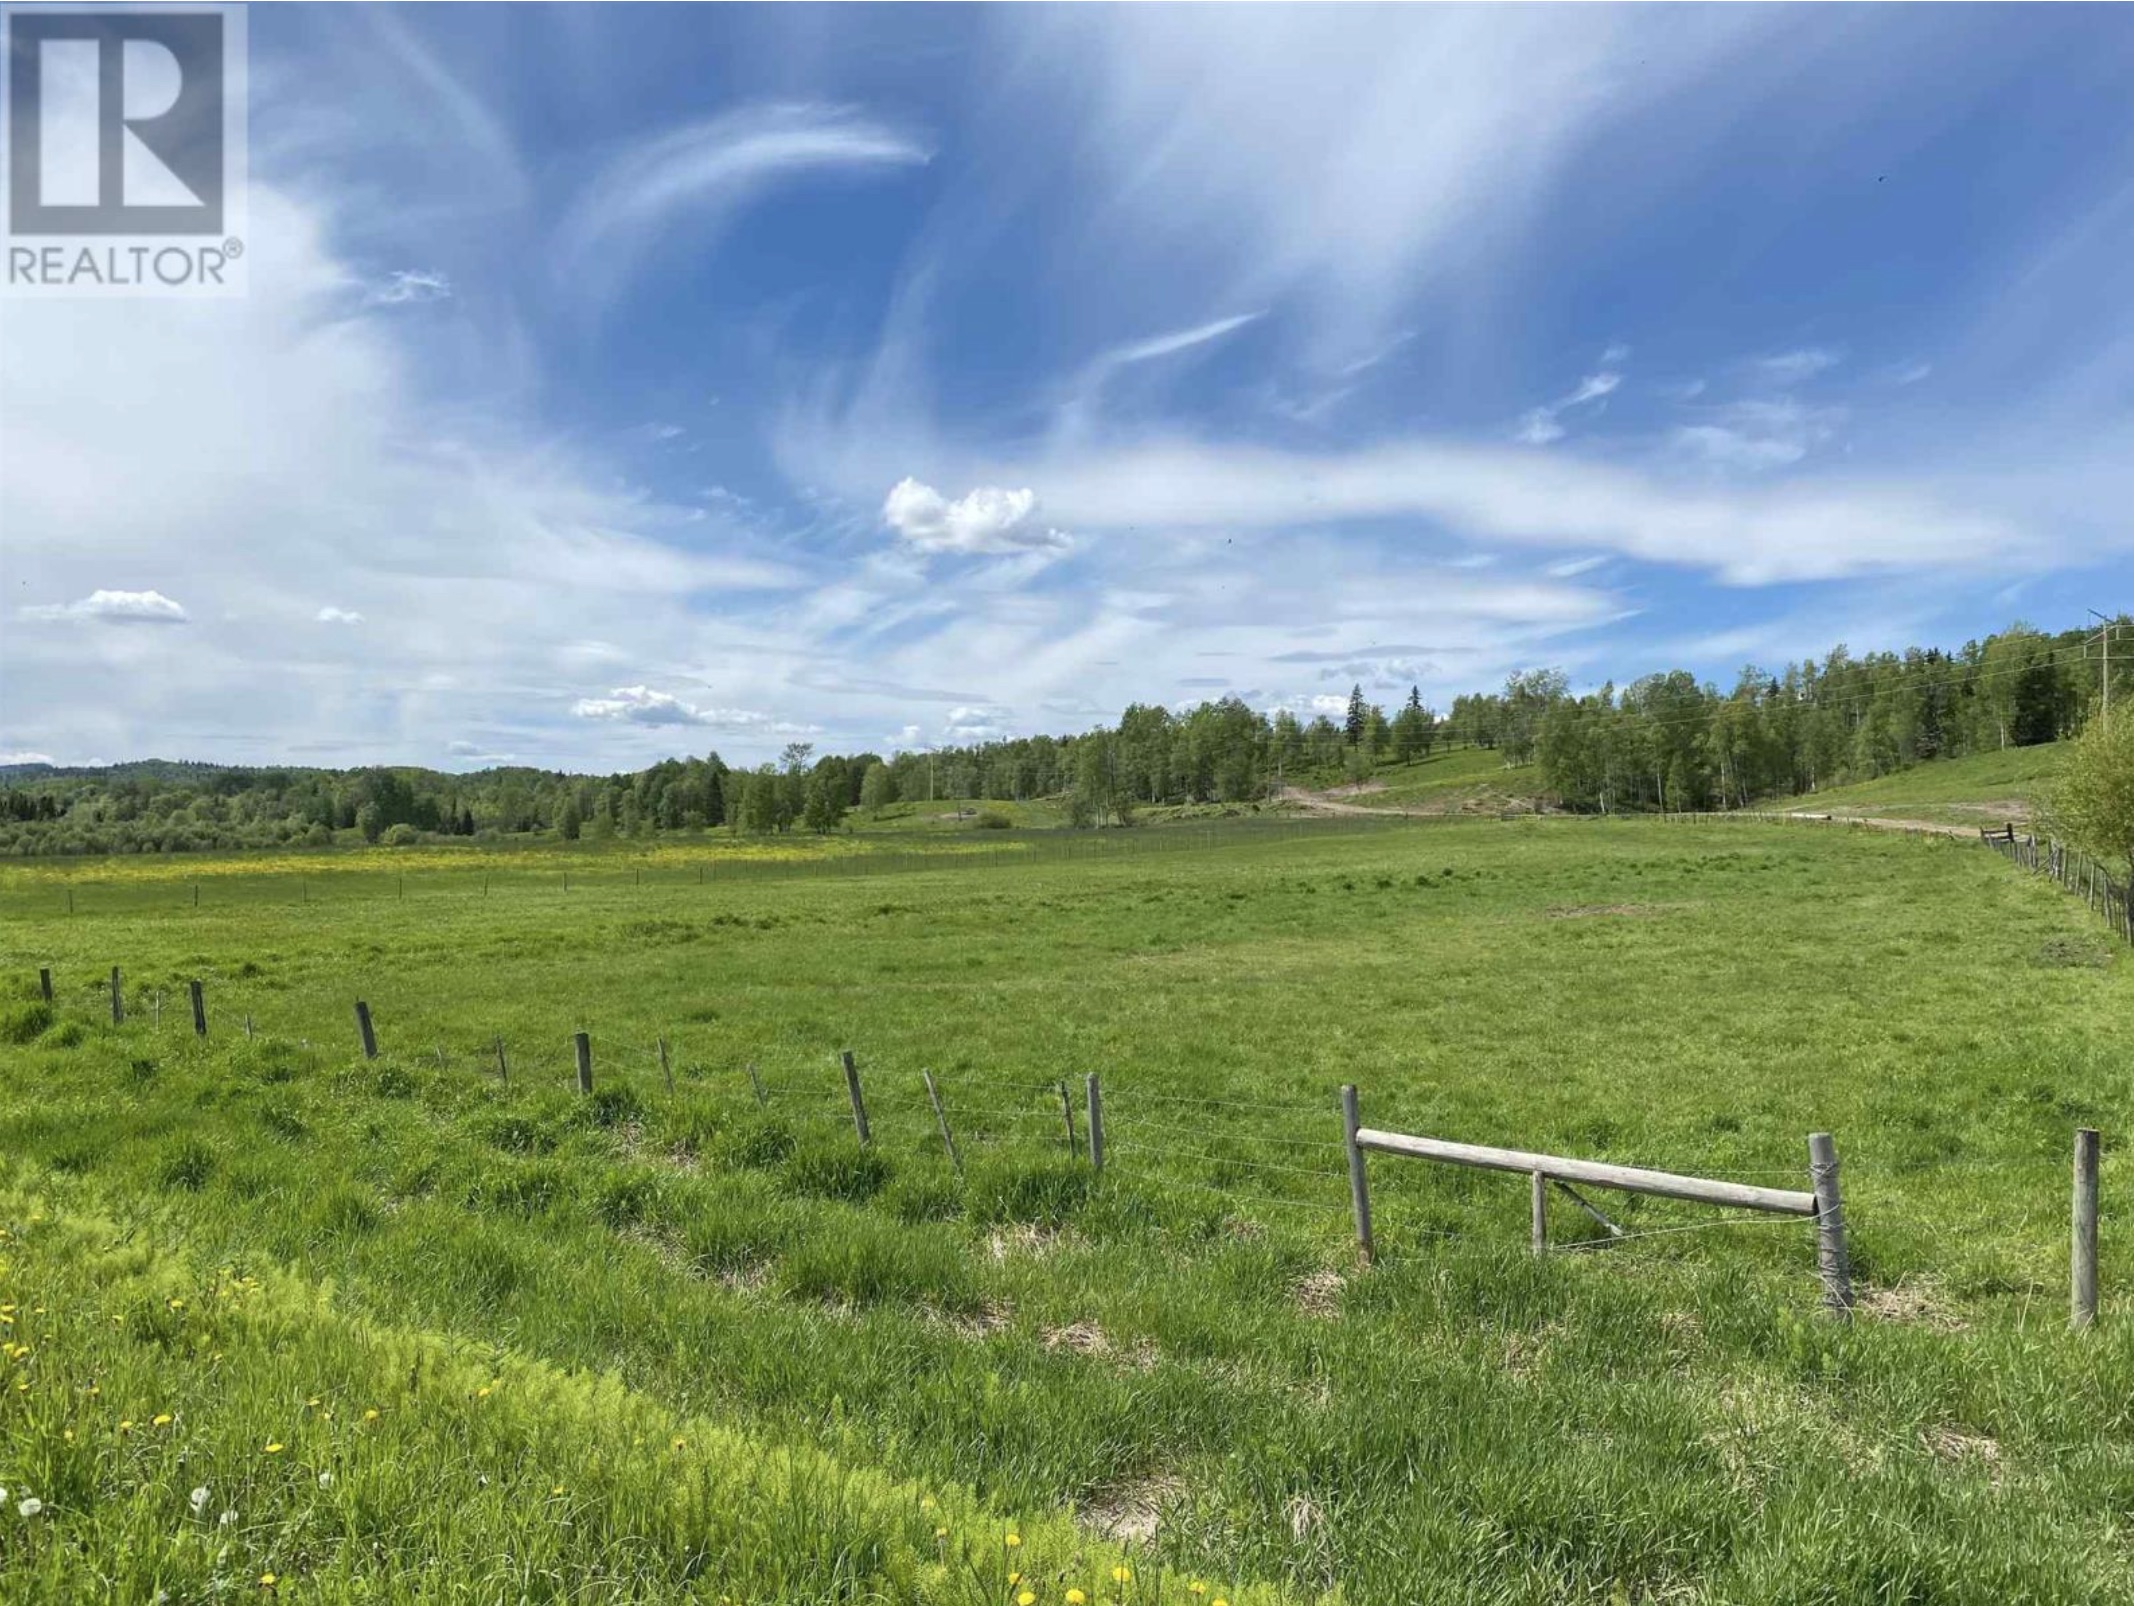 SOLD | 28880 Upper Fraser Road, Prince George > 726 Acres in 6 Titles | 2 Residences | Runs 200 Cow/Calf Pairs | 3 Miles Lakefront | Timber Value